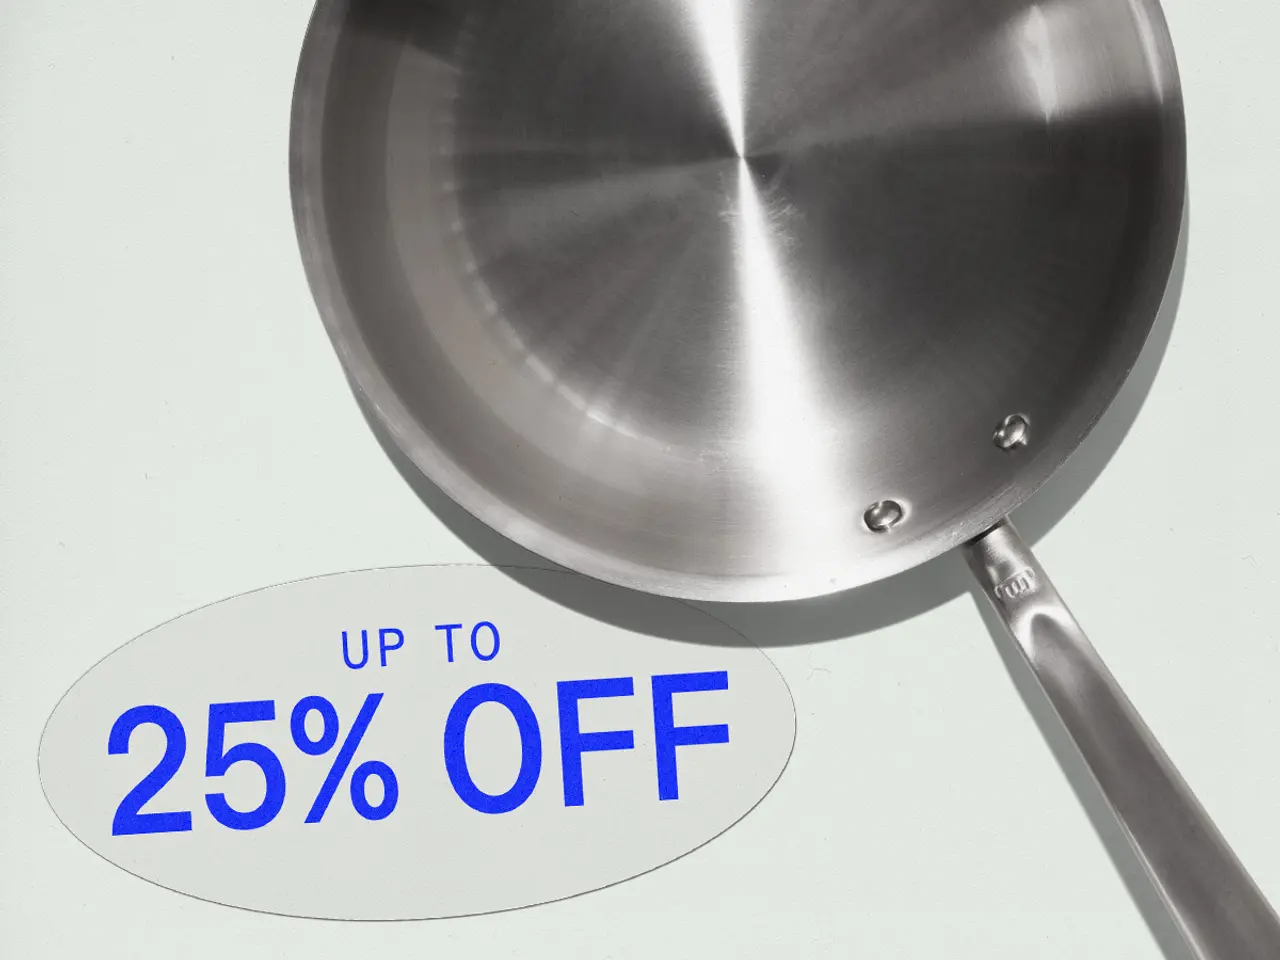 A stainless steel frying pan is displayed with a tag showing a discount of up to 25% off.